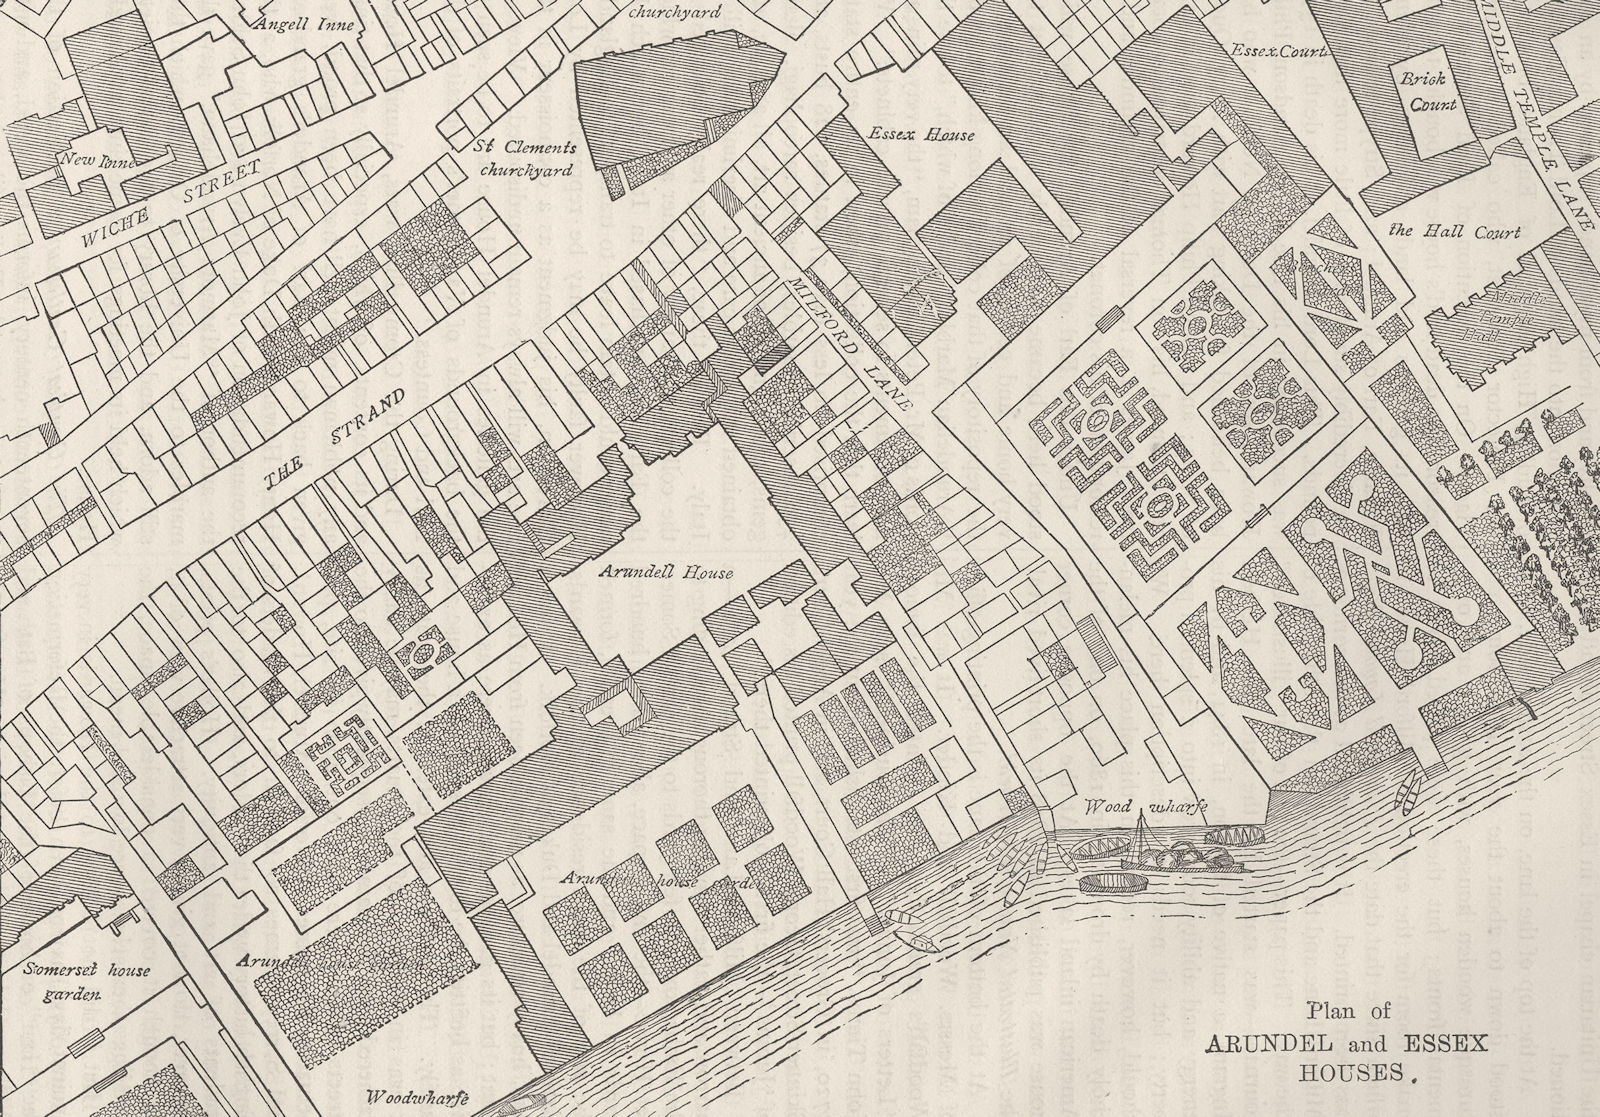 Associate Product THE STRAND. Plan of Arundel and Essex Houses. London c1880 old antique map